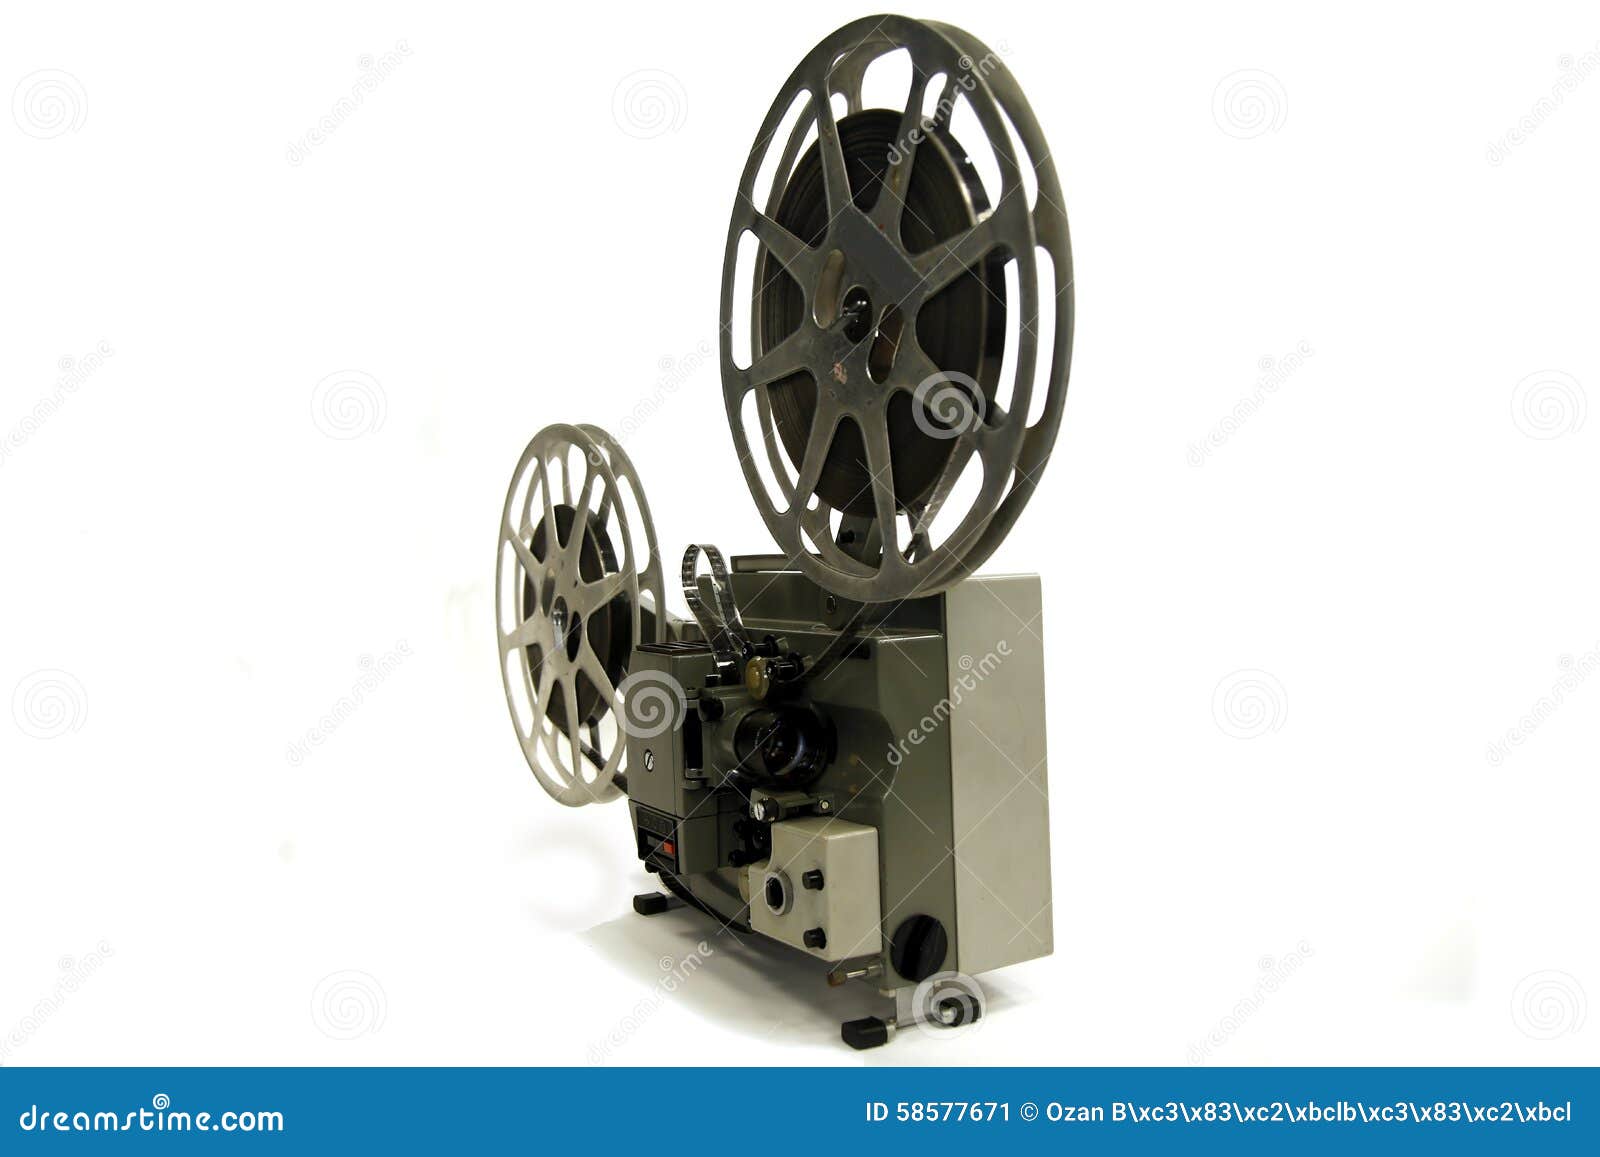 16mm Film Projector stock image. Image of camera, obsolete - 58577671